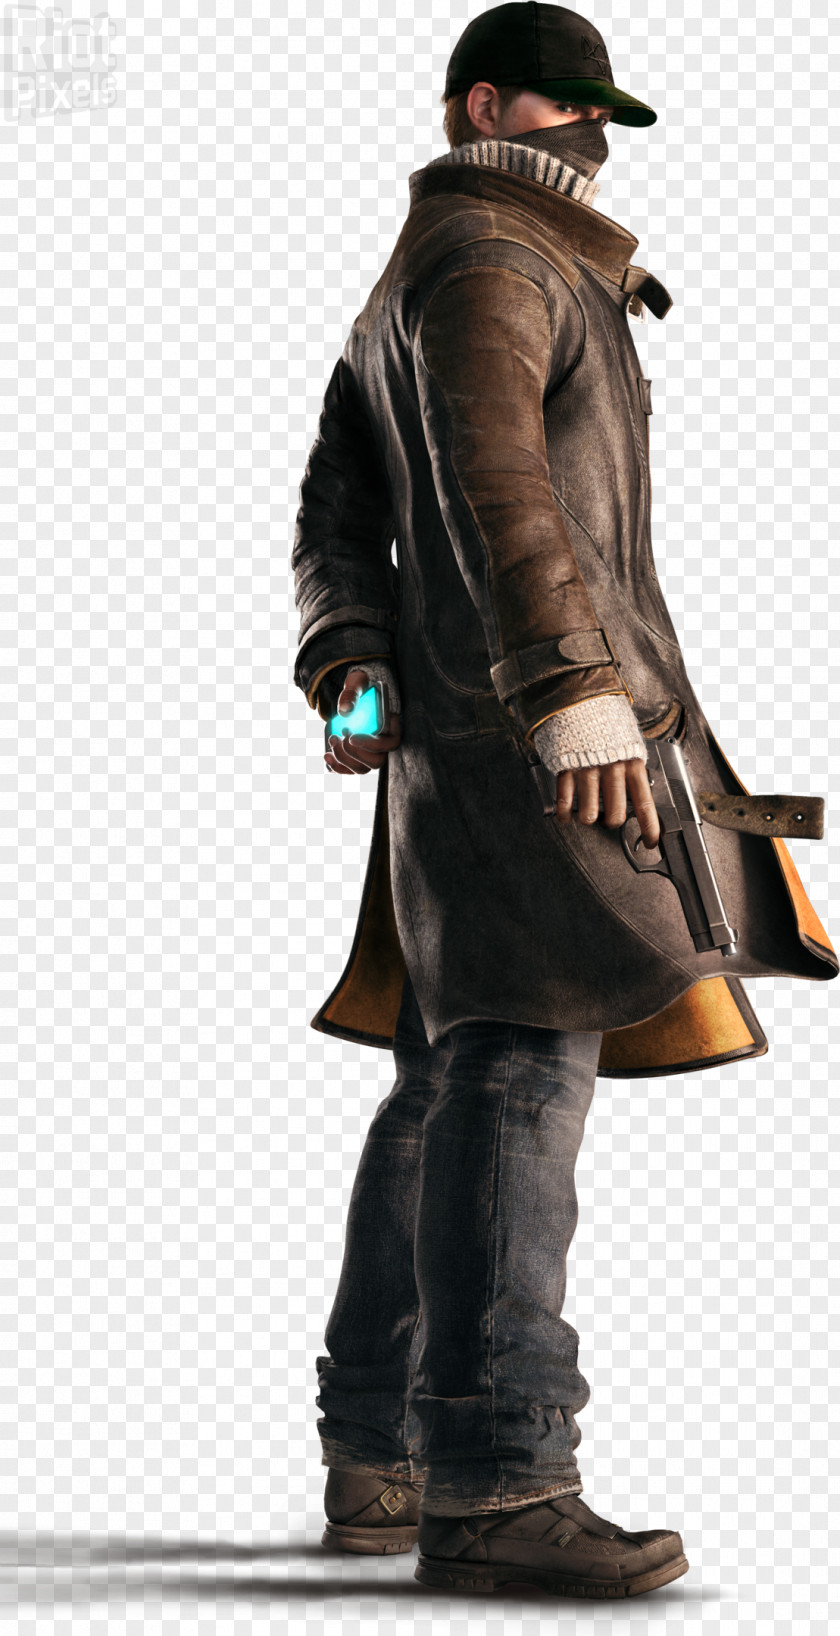 Watch Dogs 2 Aiden Pearce Video Game Security Hacker PNG